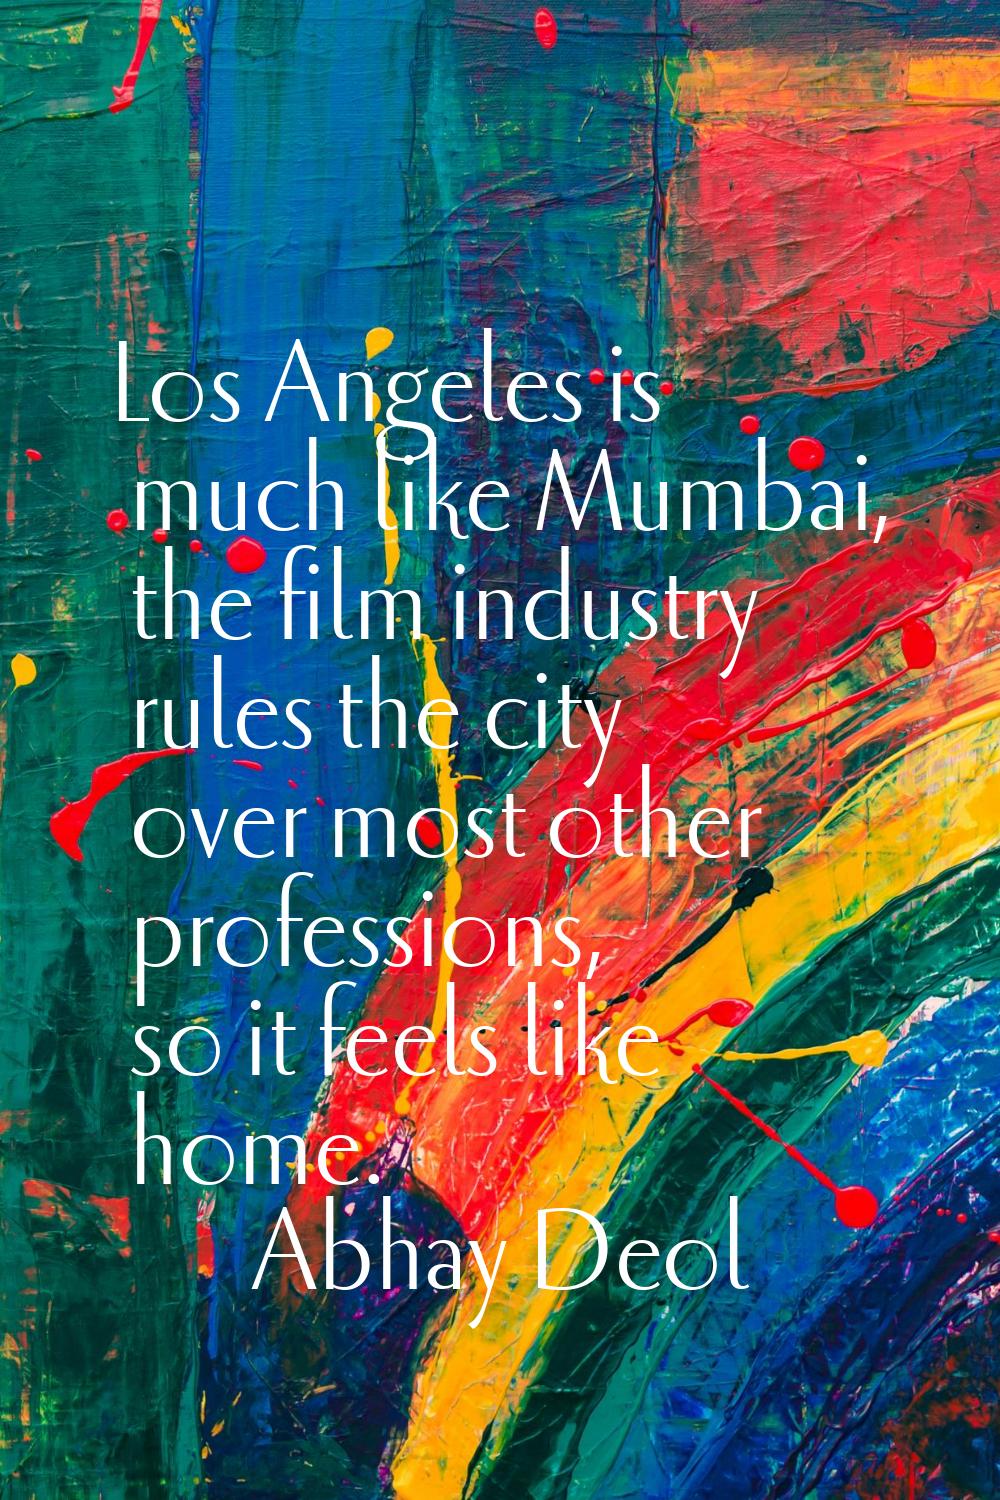 Los Angeles is much like Mumbai, the film industry rules the city over most other professions, so i